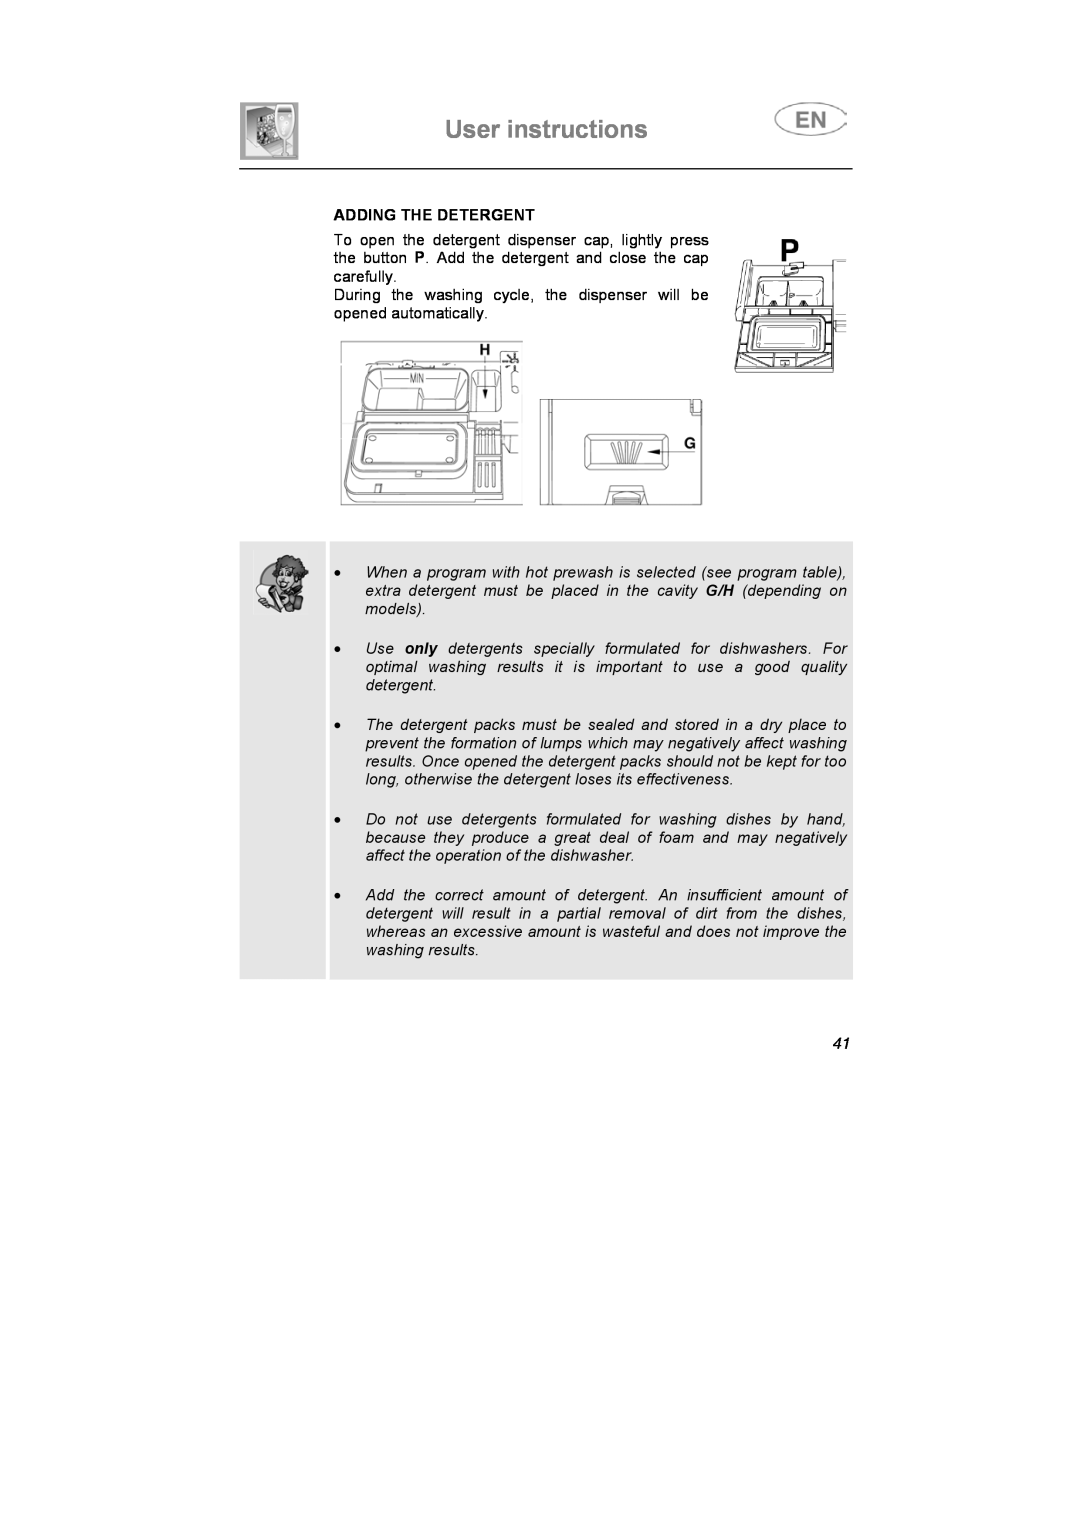 Smeg KLVS52X User instructions, Adding The Detergent, During the washing cycle, the dispenser will be opened automatically 